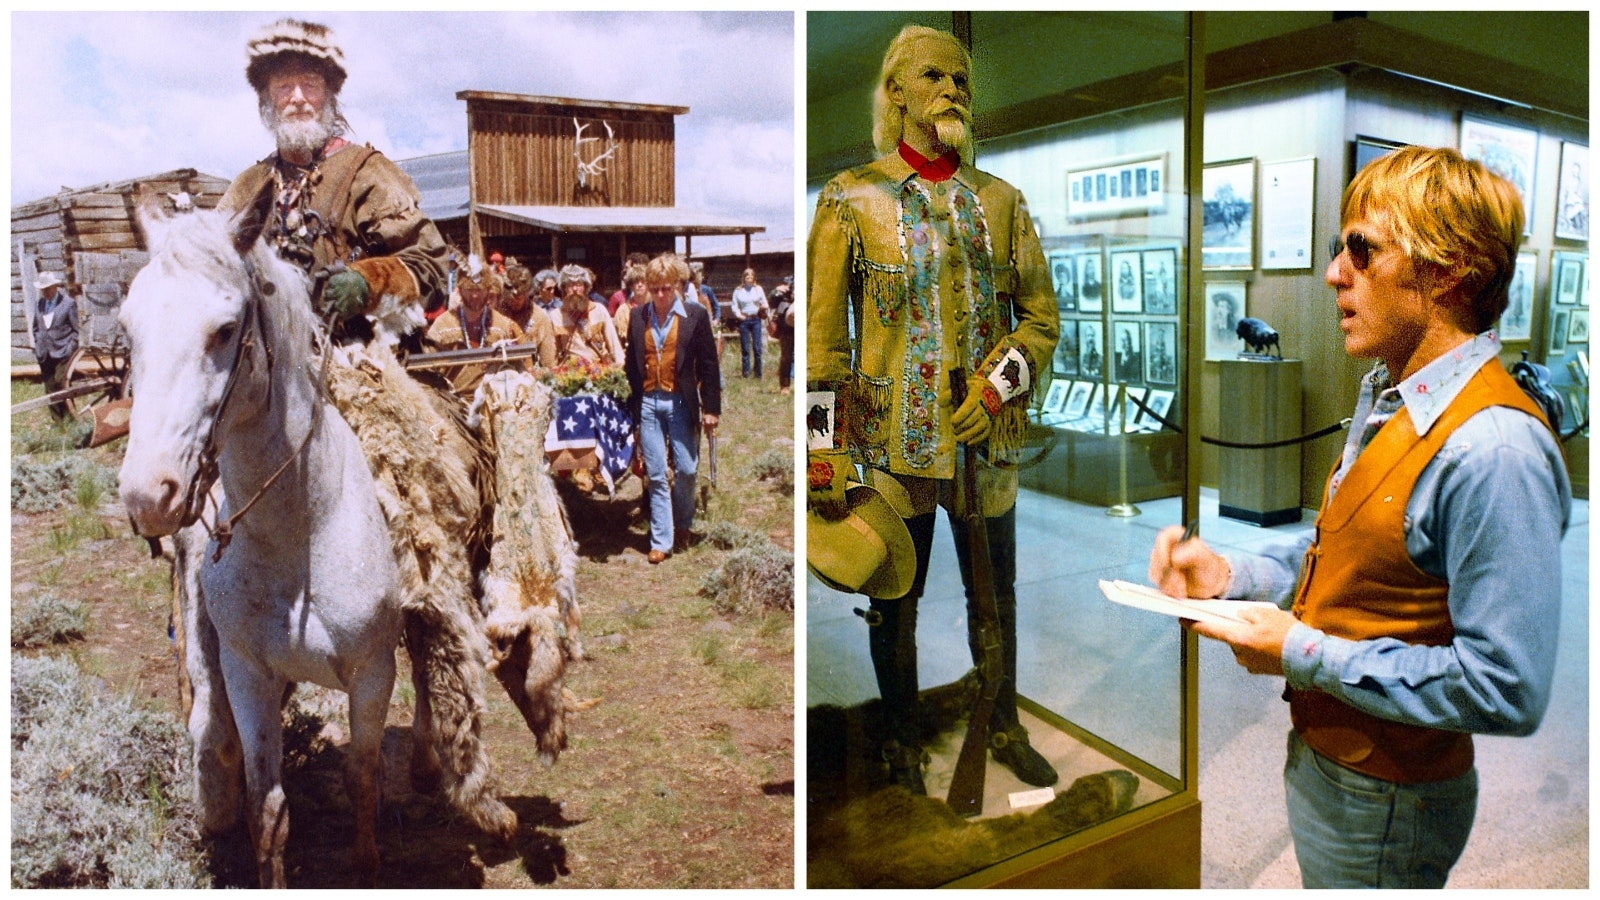 The funeral procession for John "Liver-Eating" Johnson for the 1974 reburial in Cody, Wyoming, at Old Trail Town. Right: Actor Robert Redford sketches some of the period clothing of the Old West at the Buffalo Bill Center of the West.